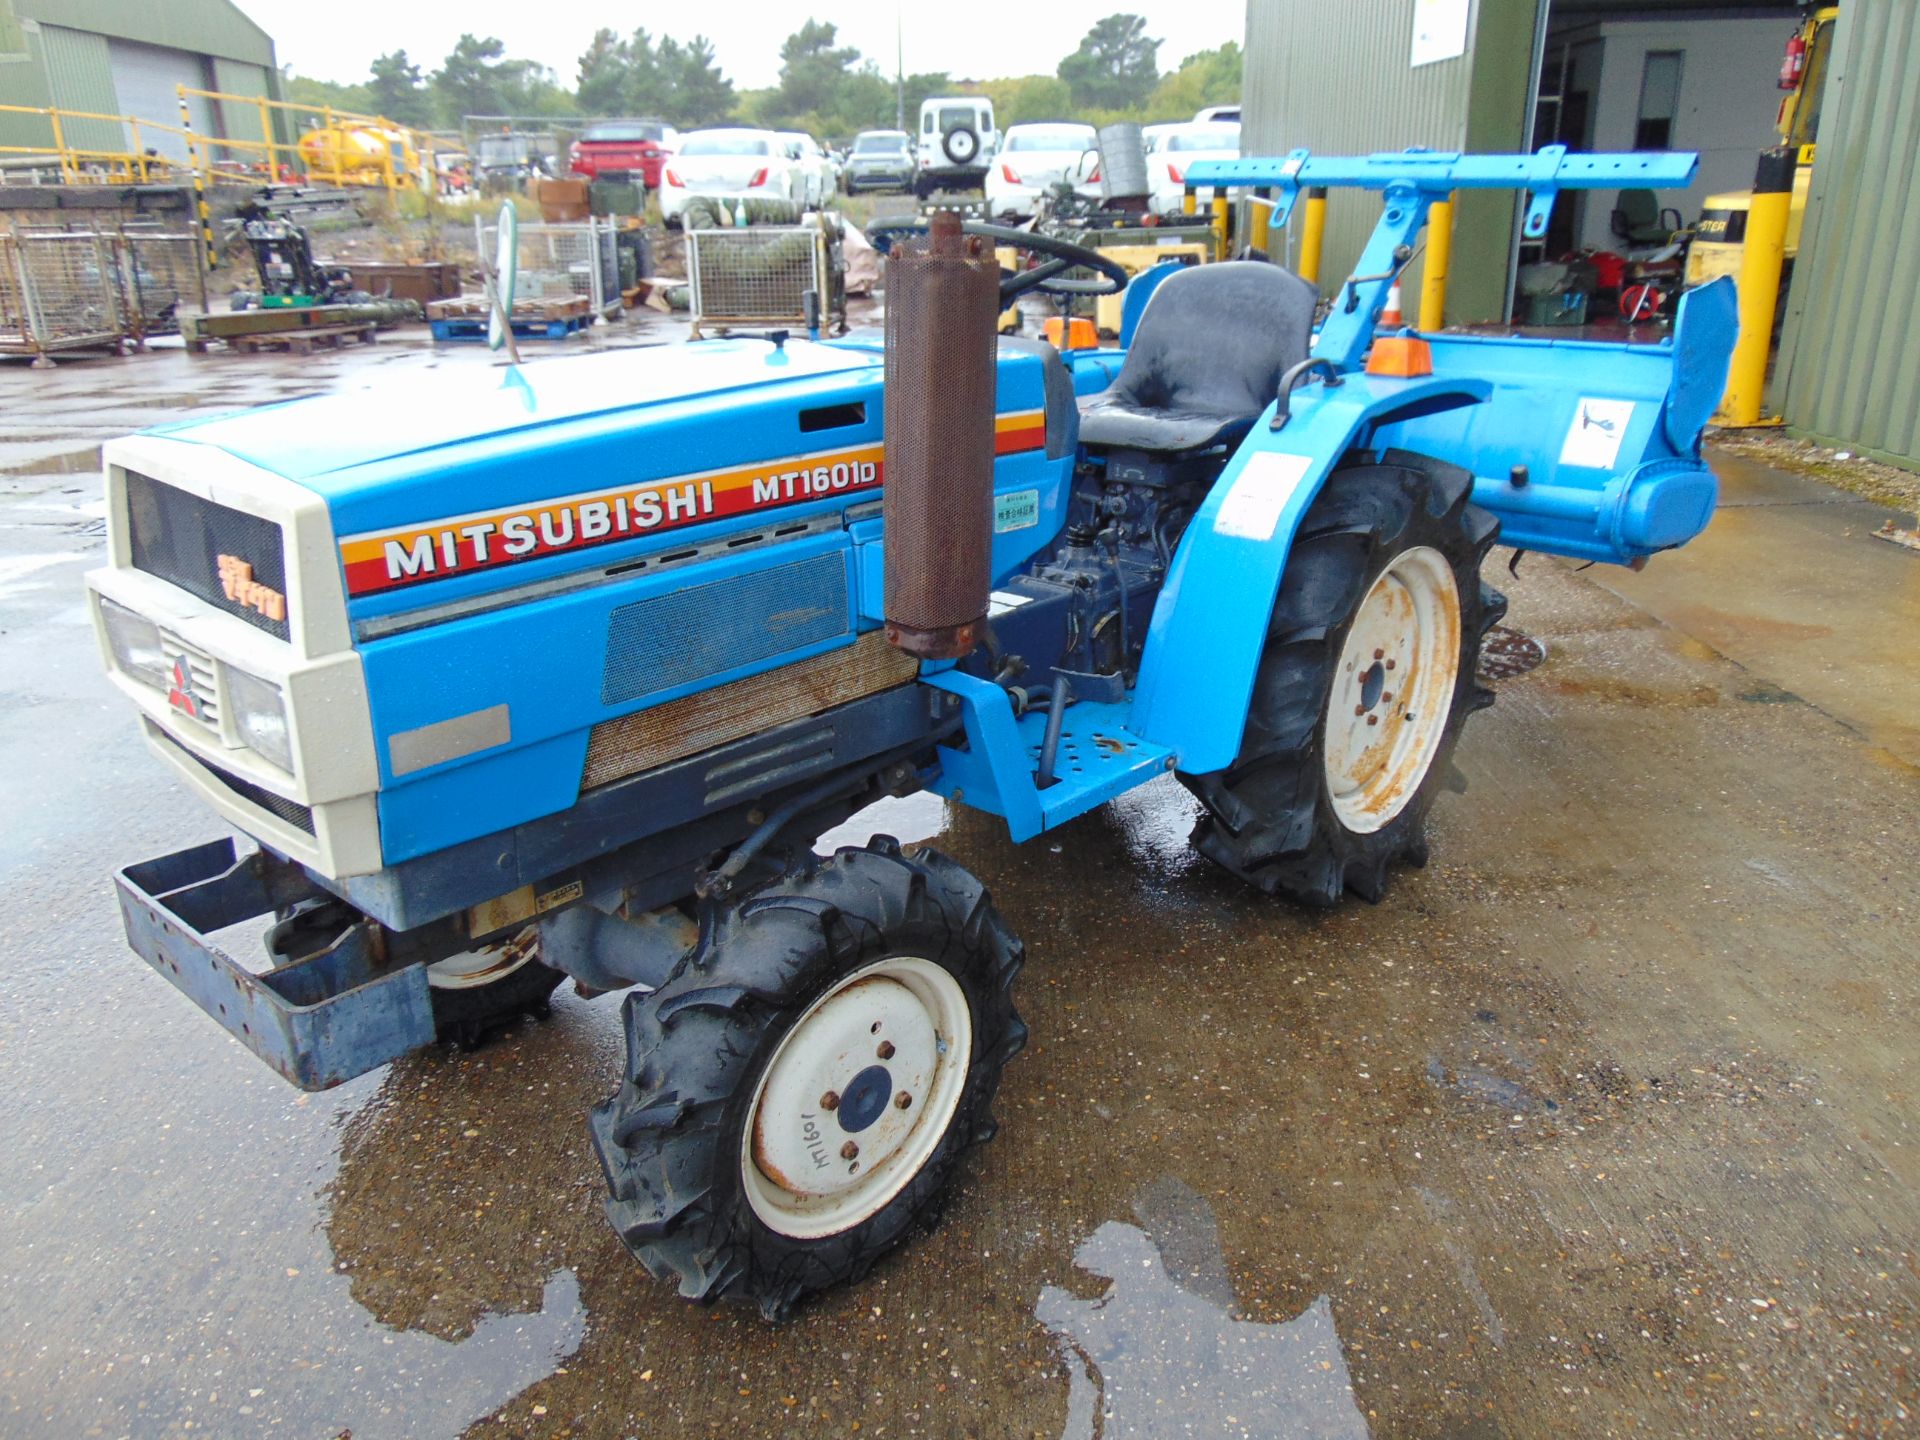 Mitsubishi MT1601D Compact Tractor c/w rotavator 797 hours only! - Image 3 of 25